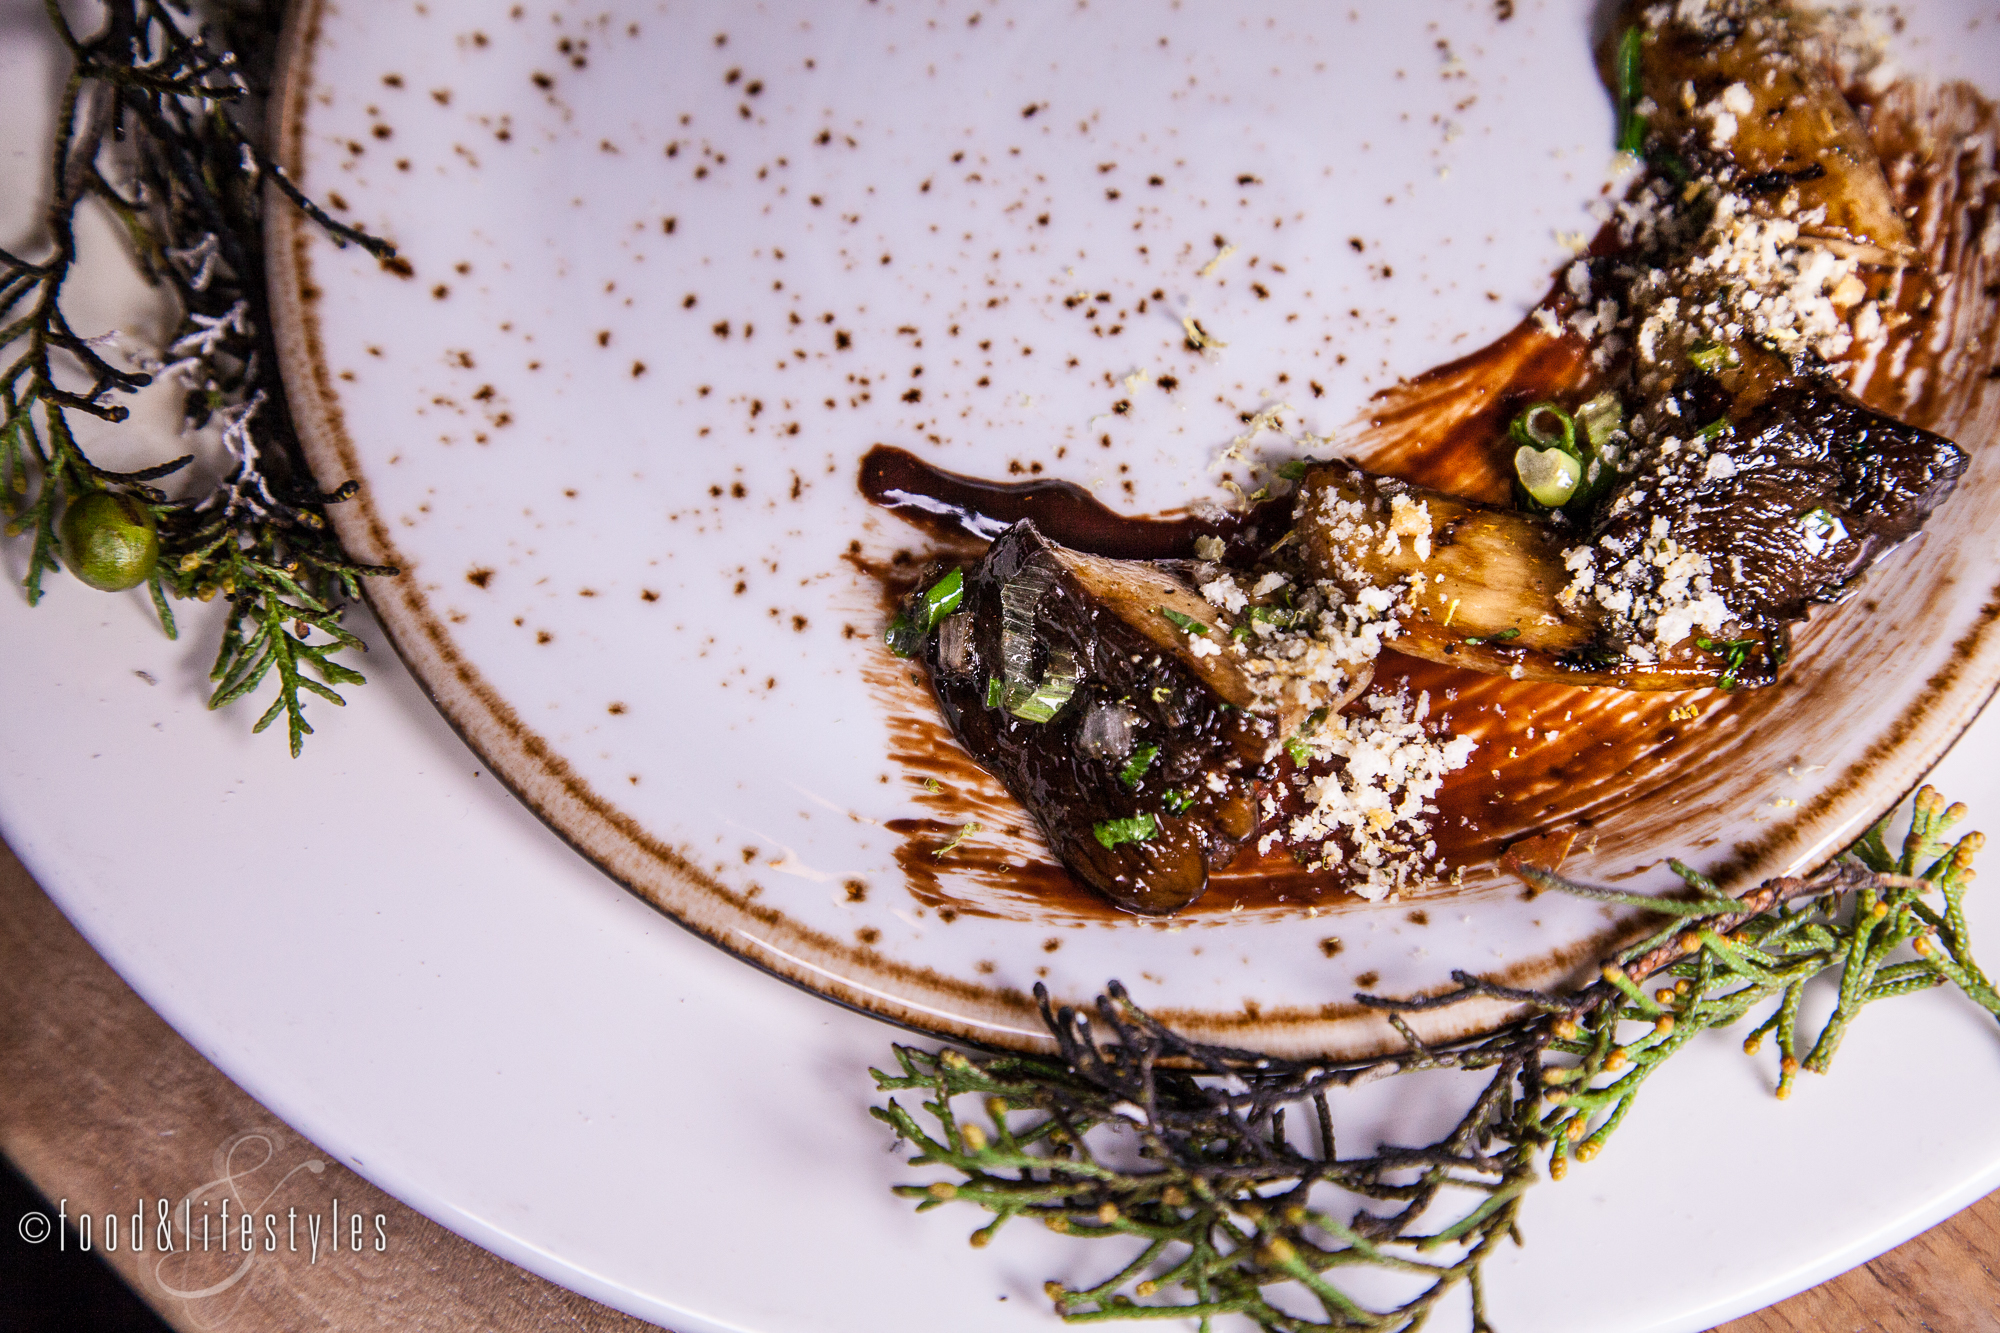 Wild mushrooms with smoked pine needles, pine nut gremolata, and Mexican chocolate